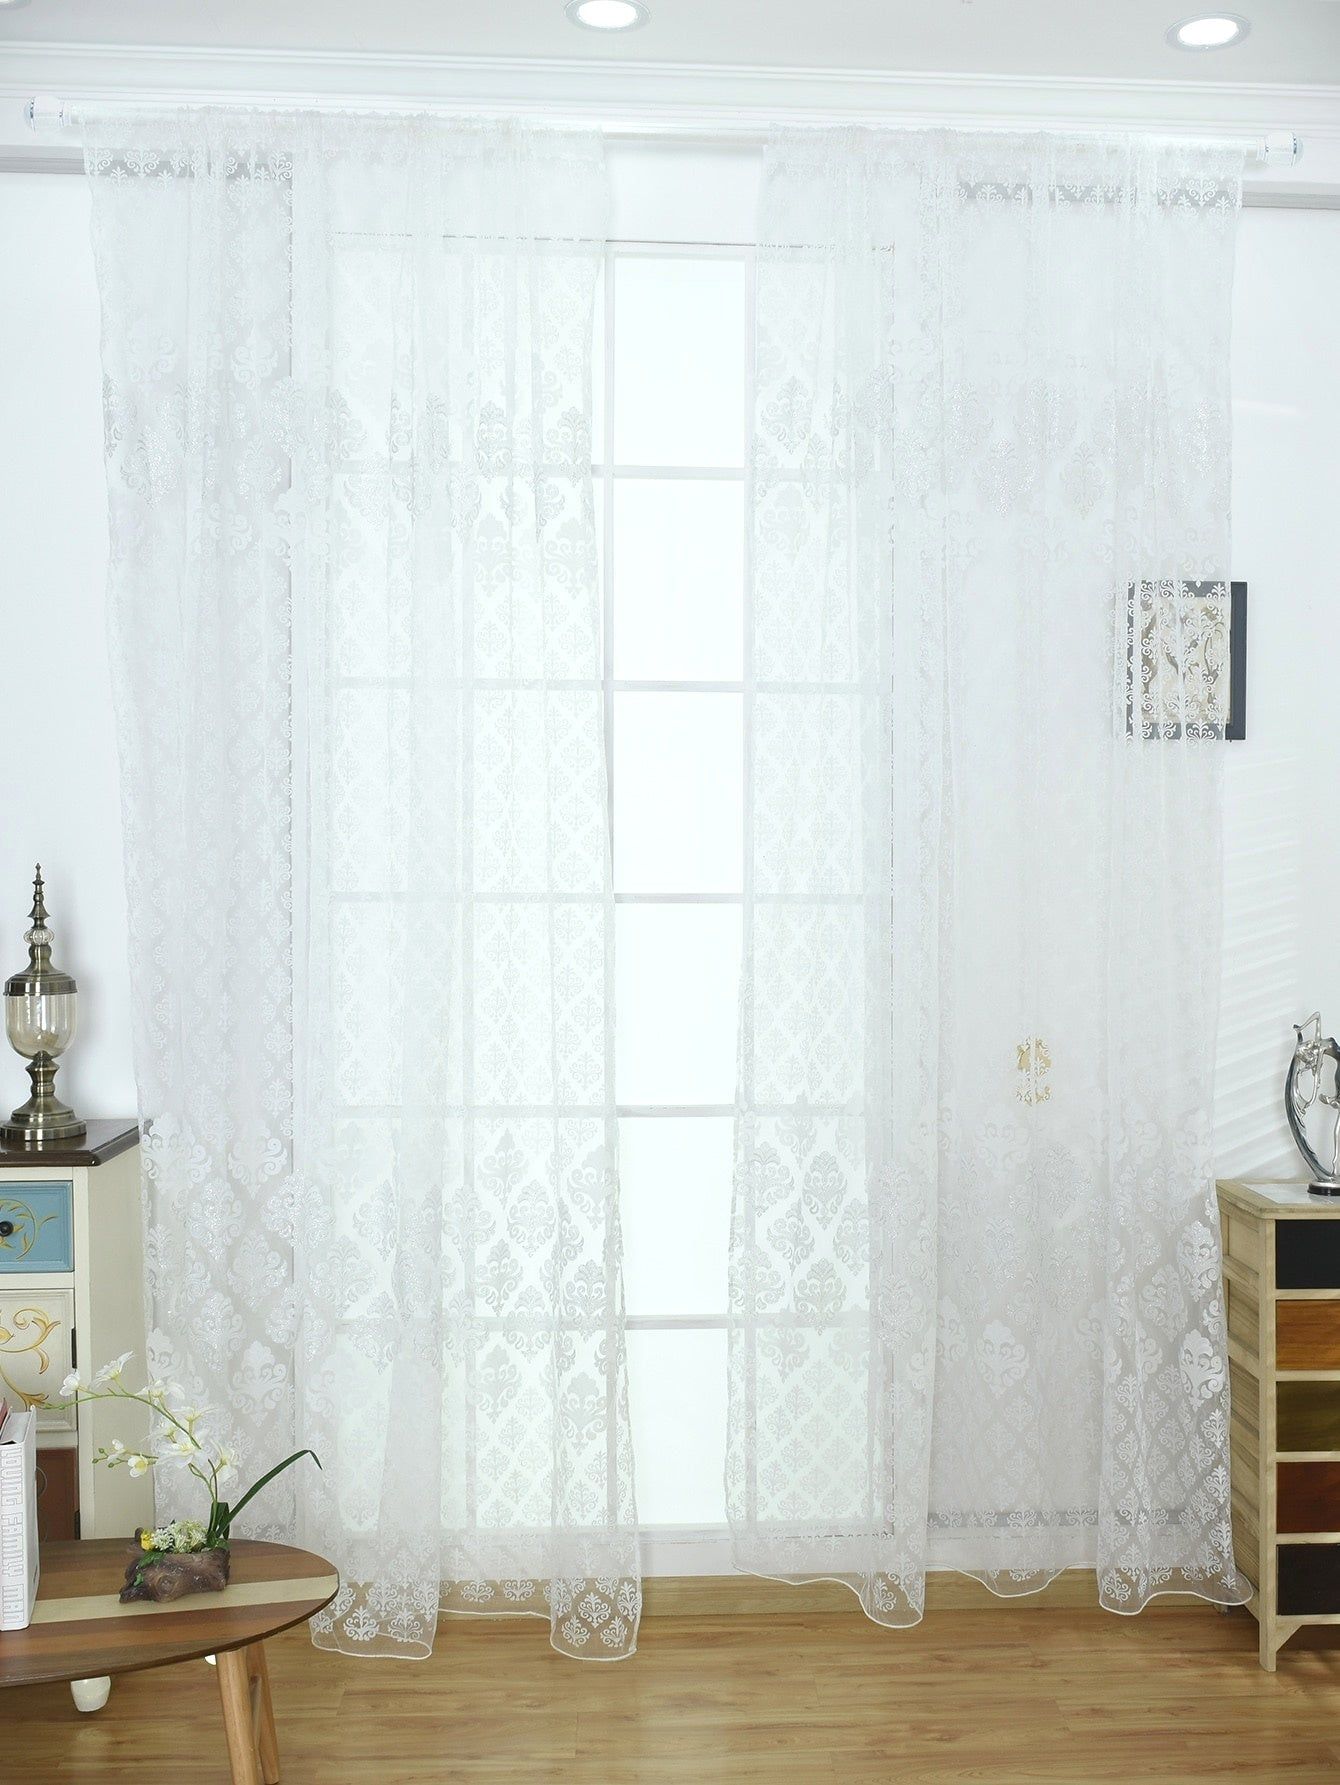 Elegant Sheer Damask Curtains: A Timeless Touch for Your Home